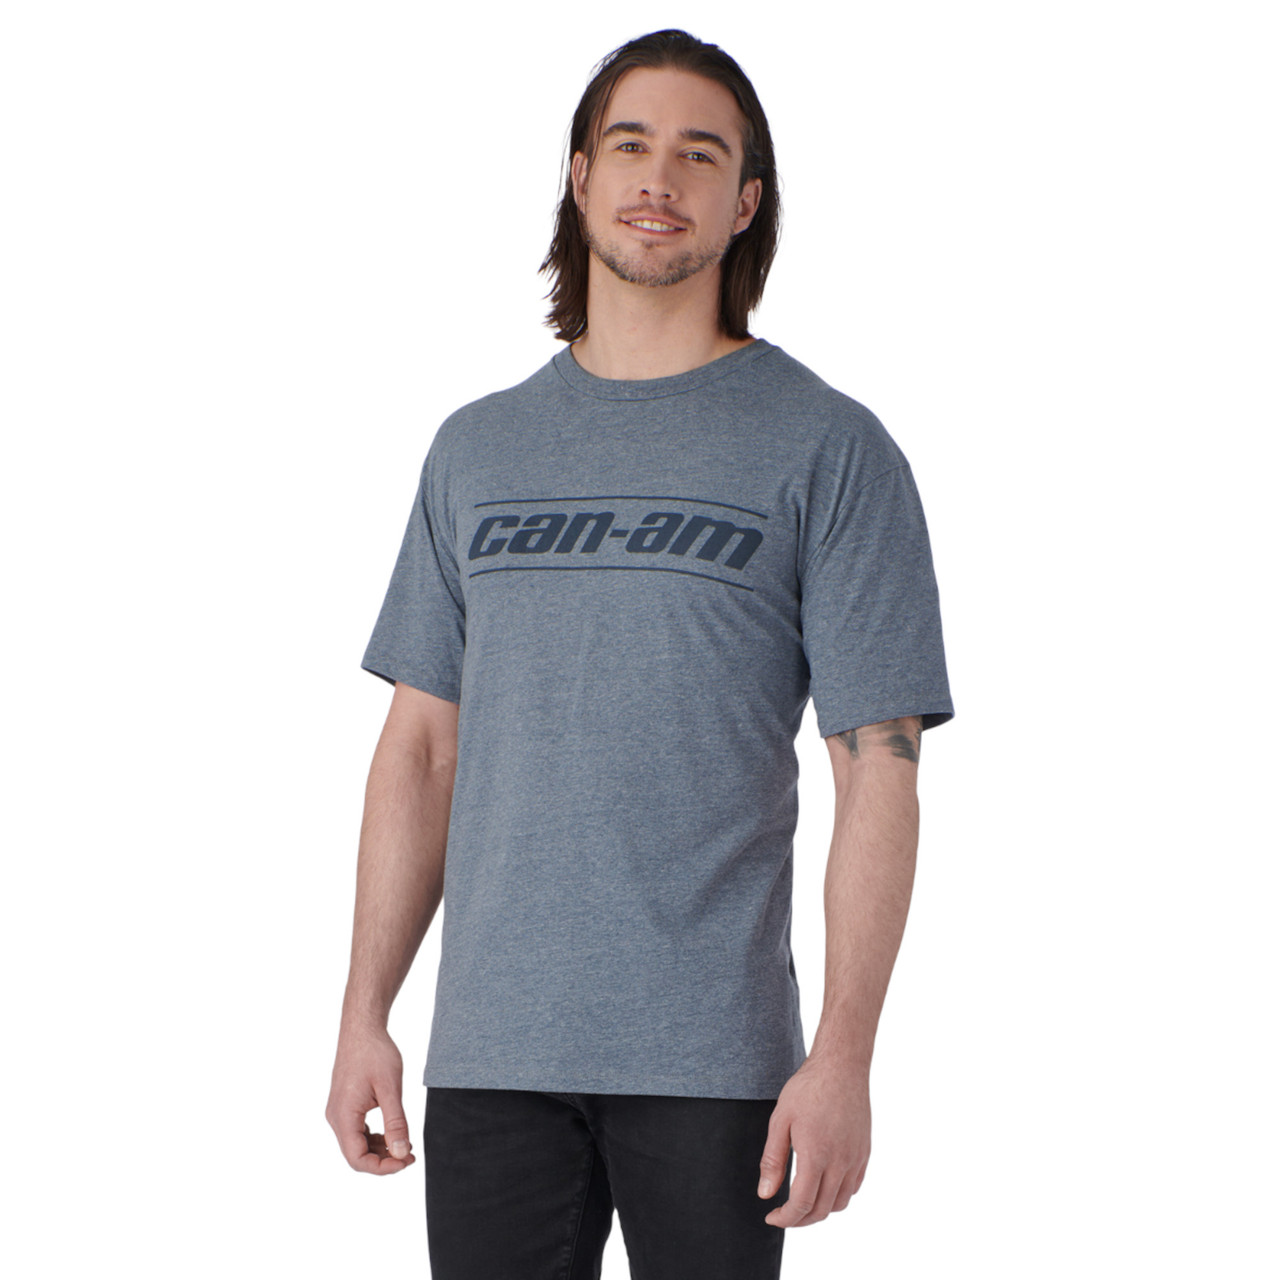 Can-Am New OEM, Men's 3XL Cotton Signature Branded T-Shirt, 4547541629